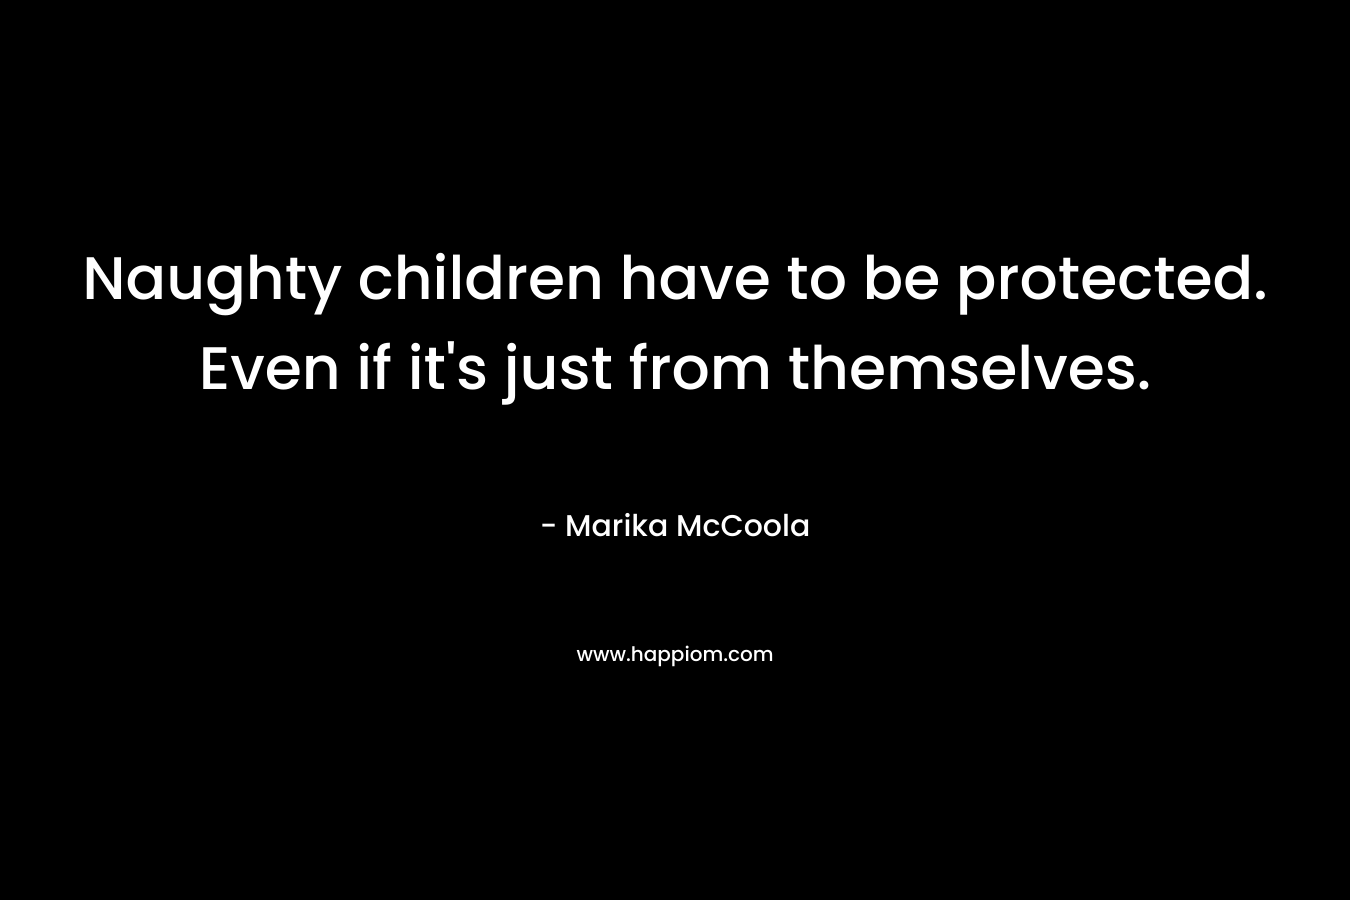 Naughty children have to be protected. Even if it’s just from themselves. – Marika McCoola